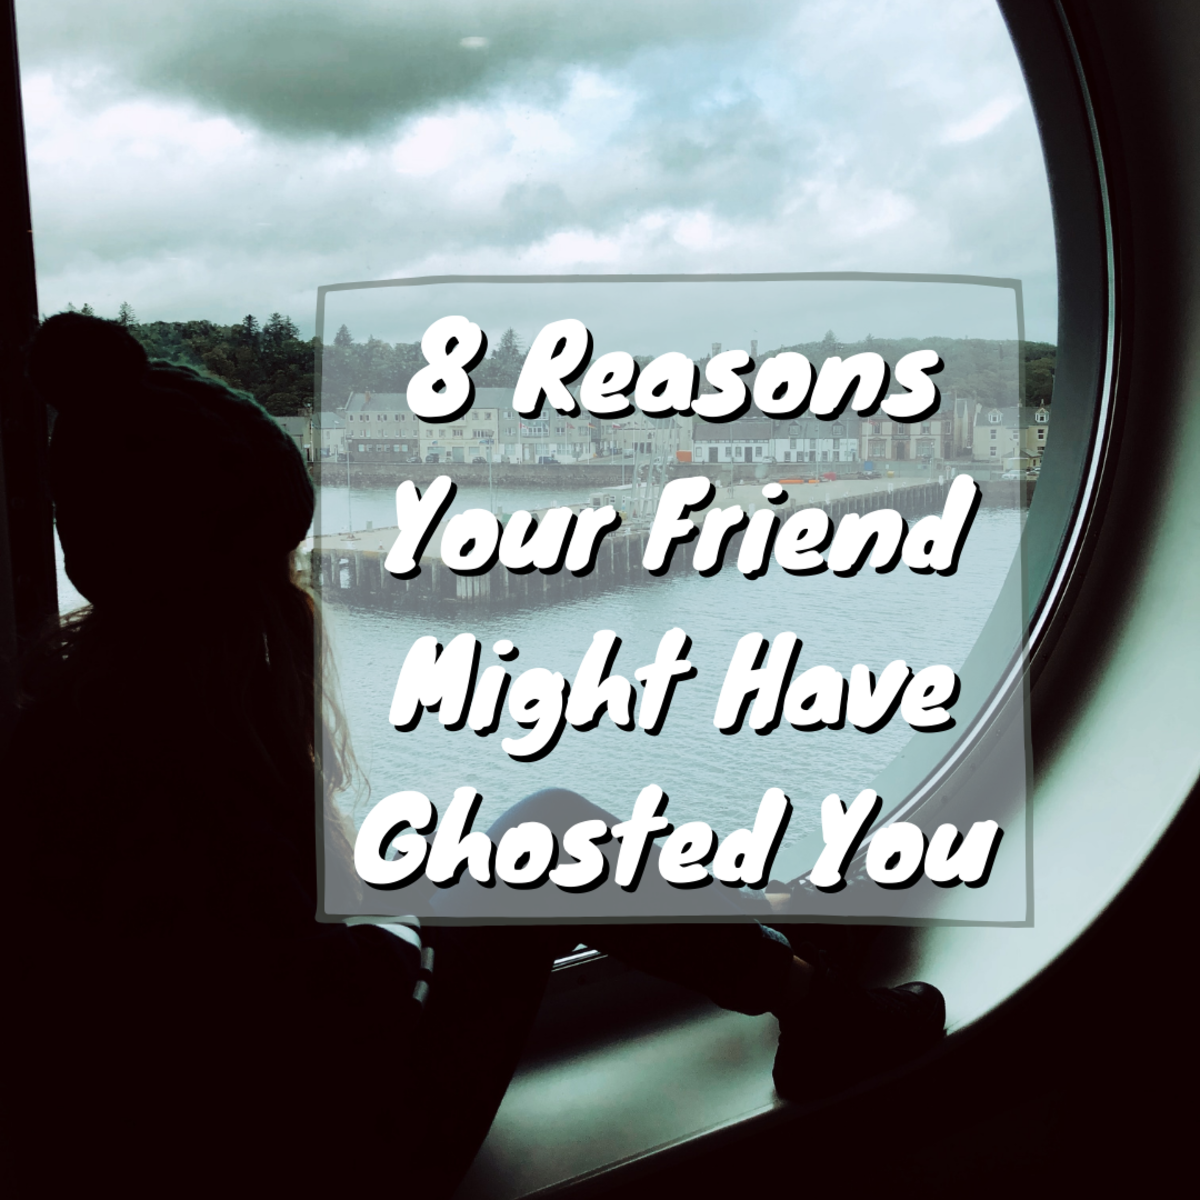 Are you thinking "why is my friend ignoring me?" You're not alone. Read on to discover 8 reasons why your friend is ghosting you and learn what you can do about it.